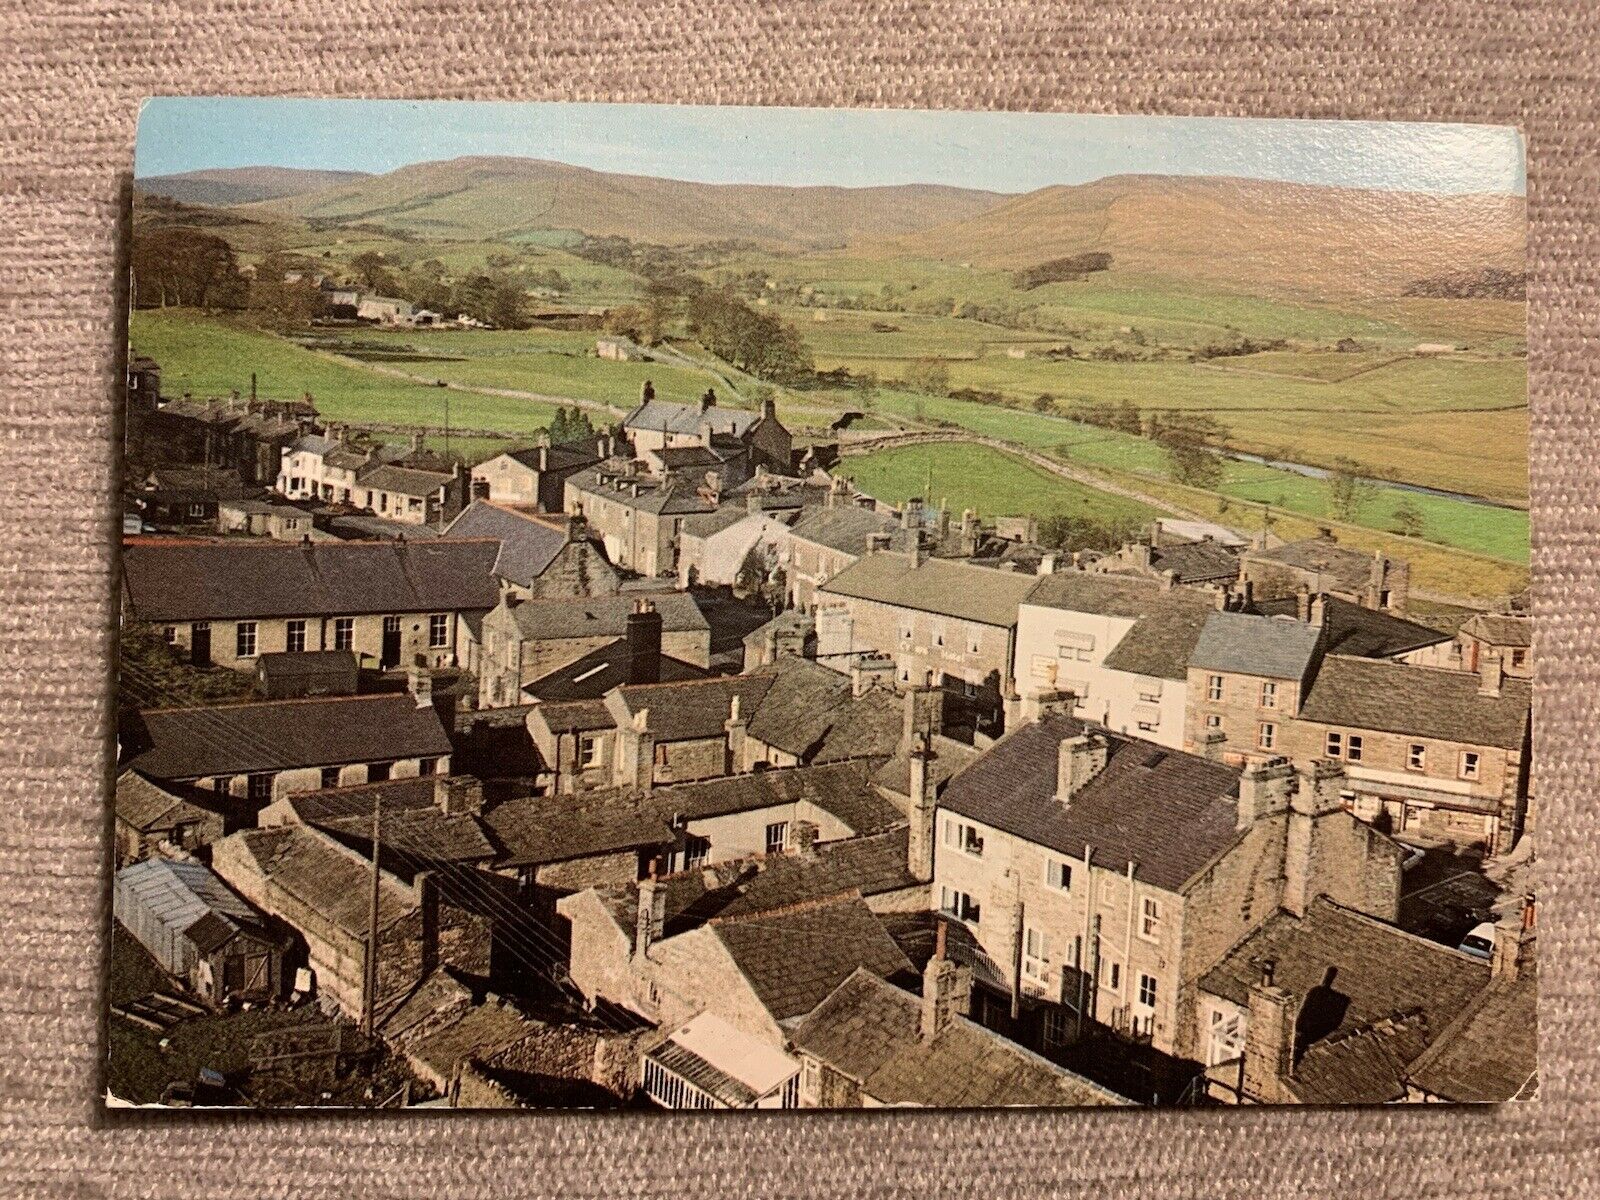 House Clearance - Service of Hawes, Wensleydale ~ Looking towards Hardraw